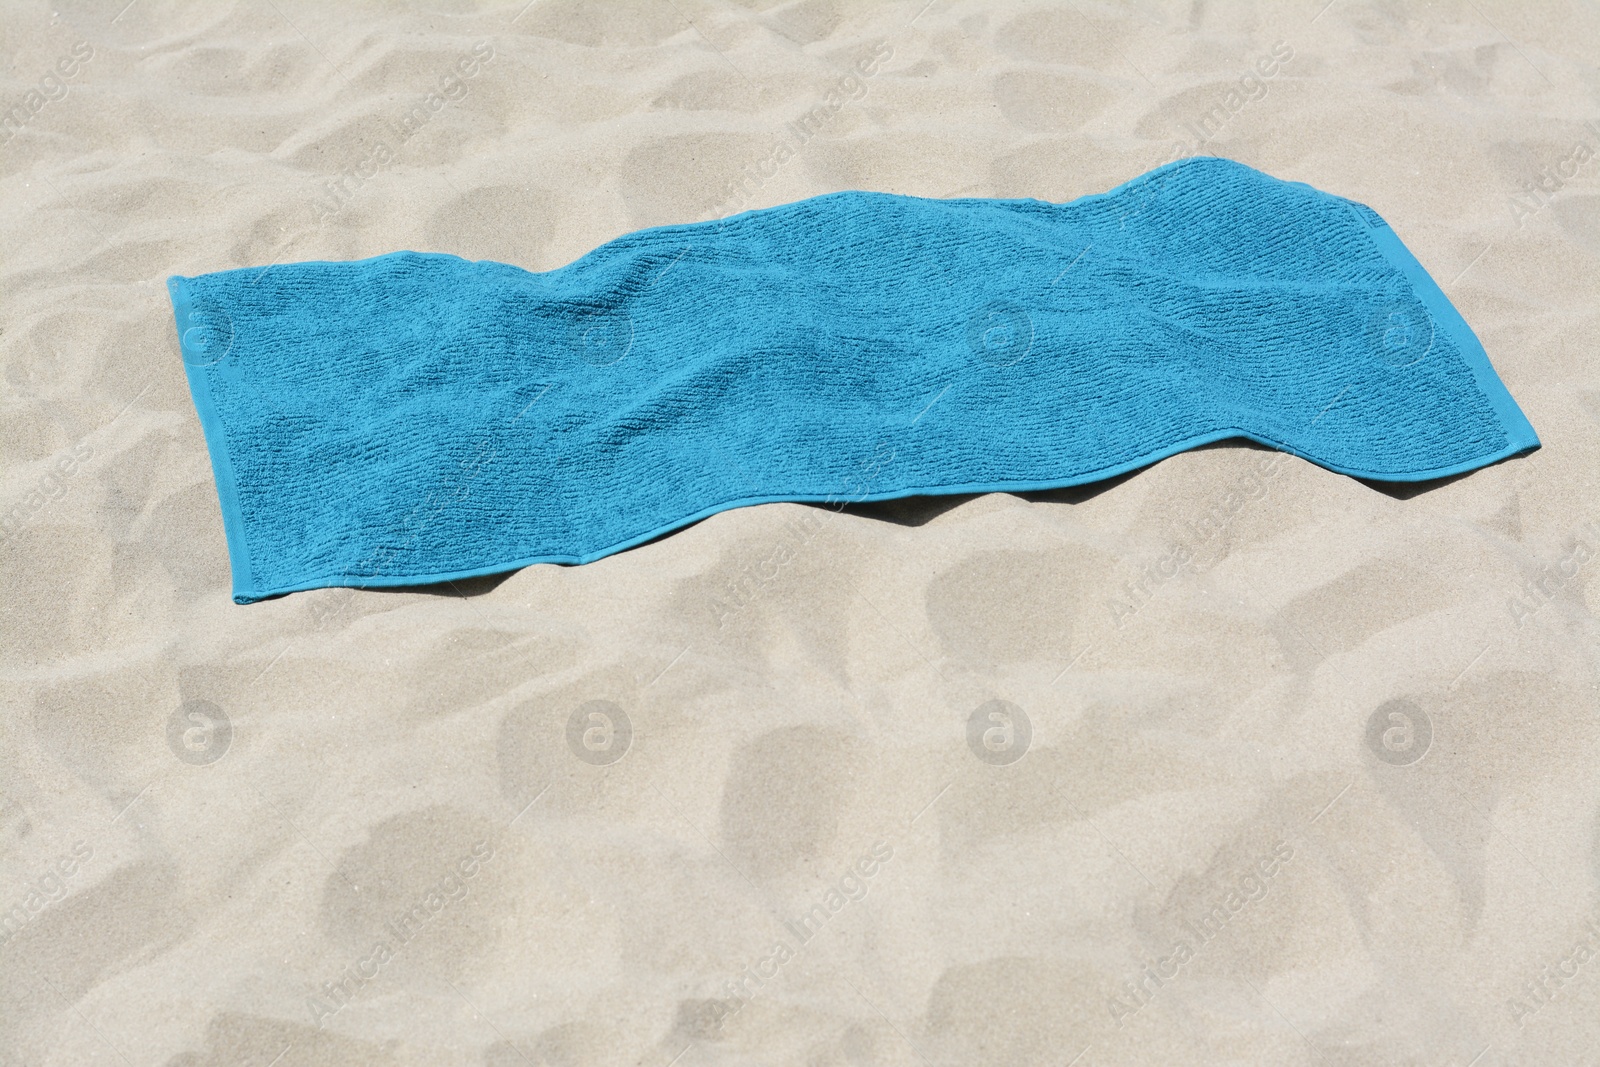 Photo of Soft blue towel on sandy beach, space for text